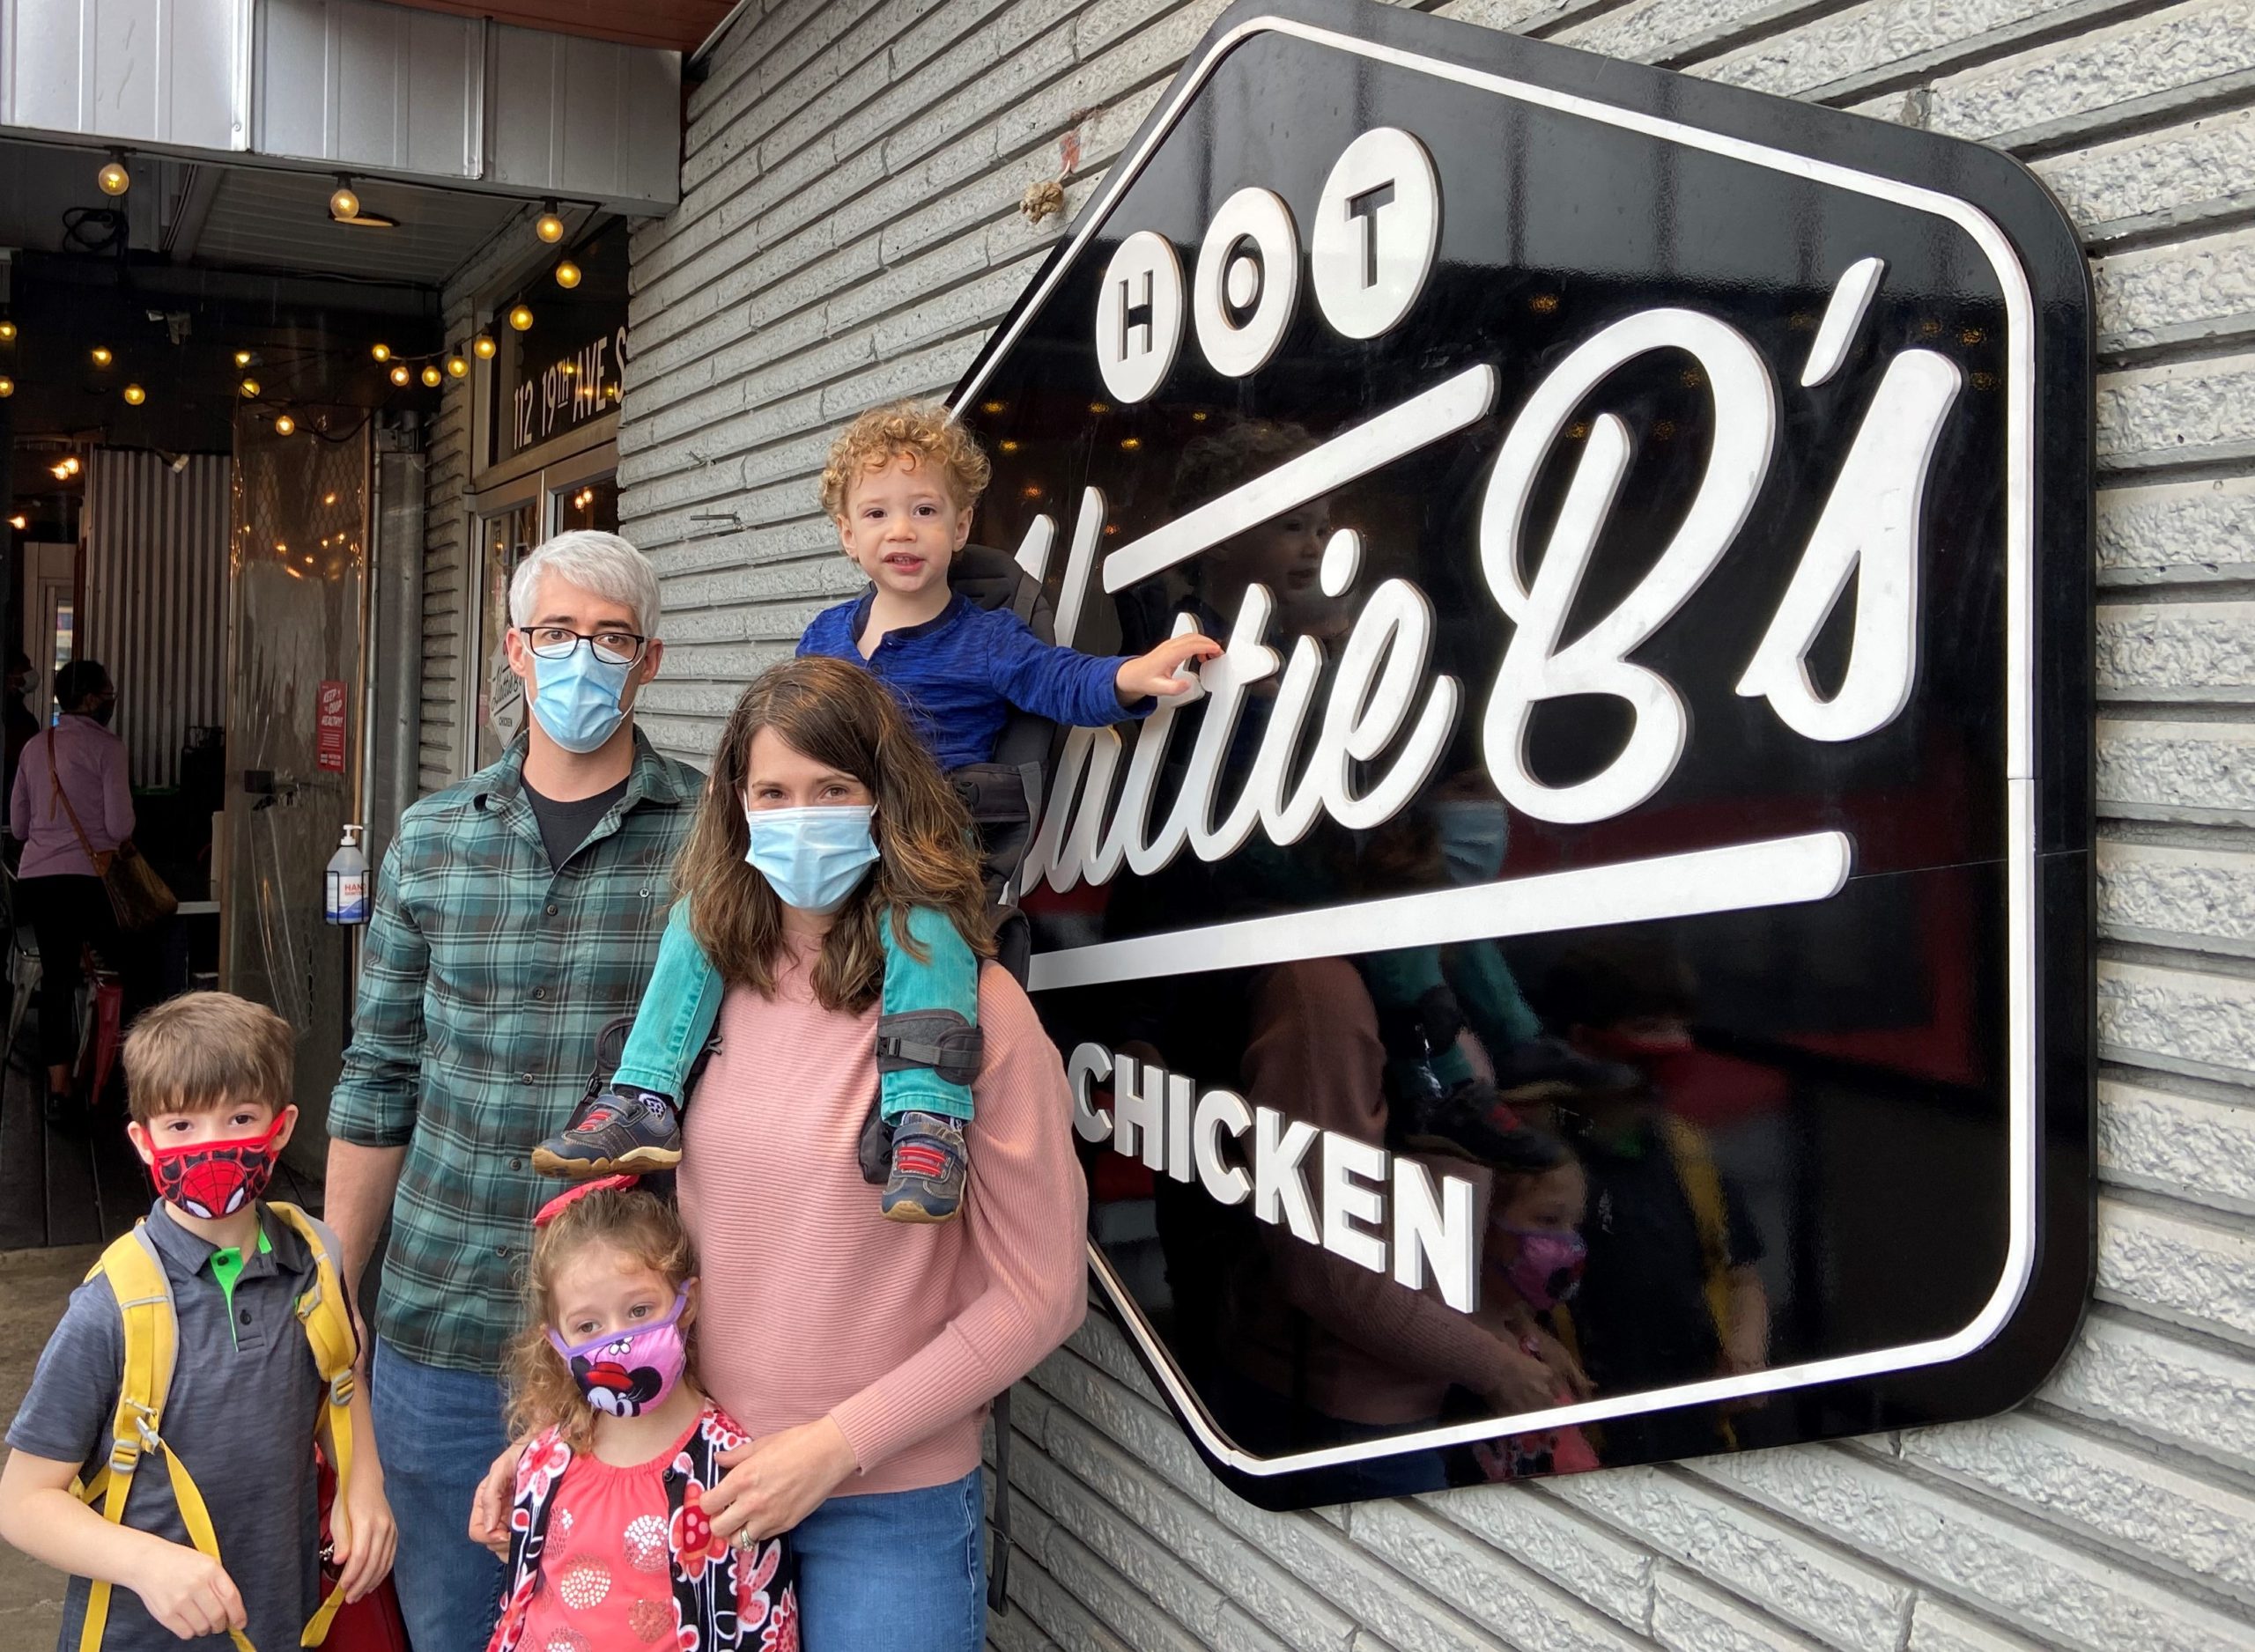 WHAT TO DO IN NASHVILLE WITH KIDS IN THE RAIN!